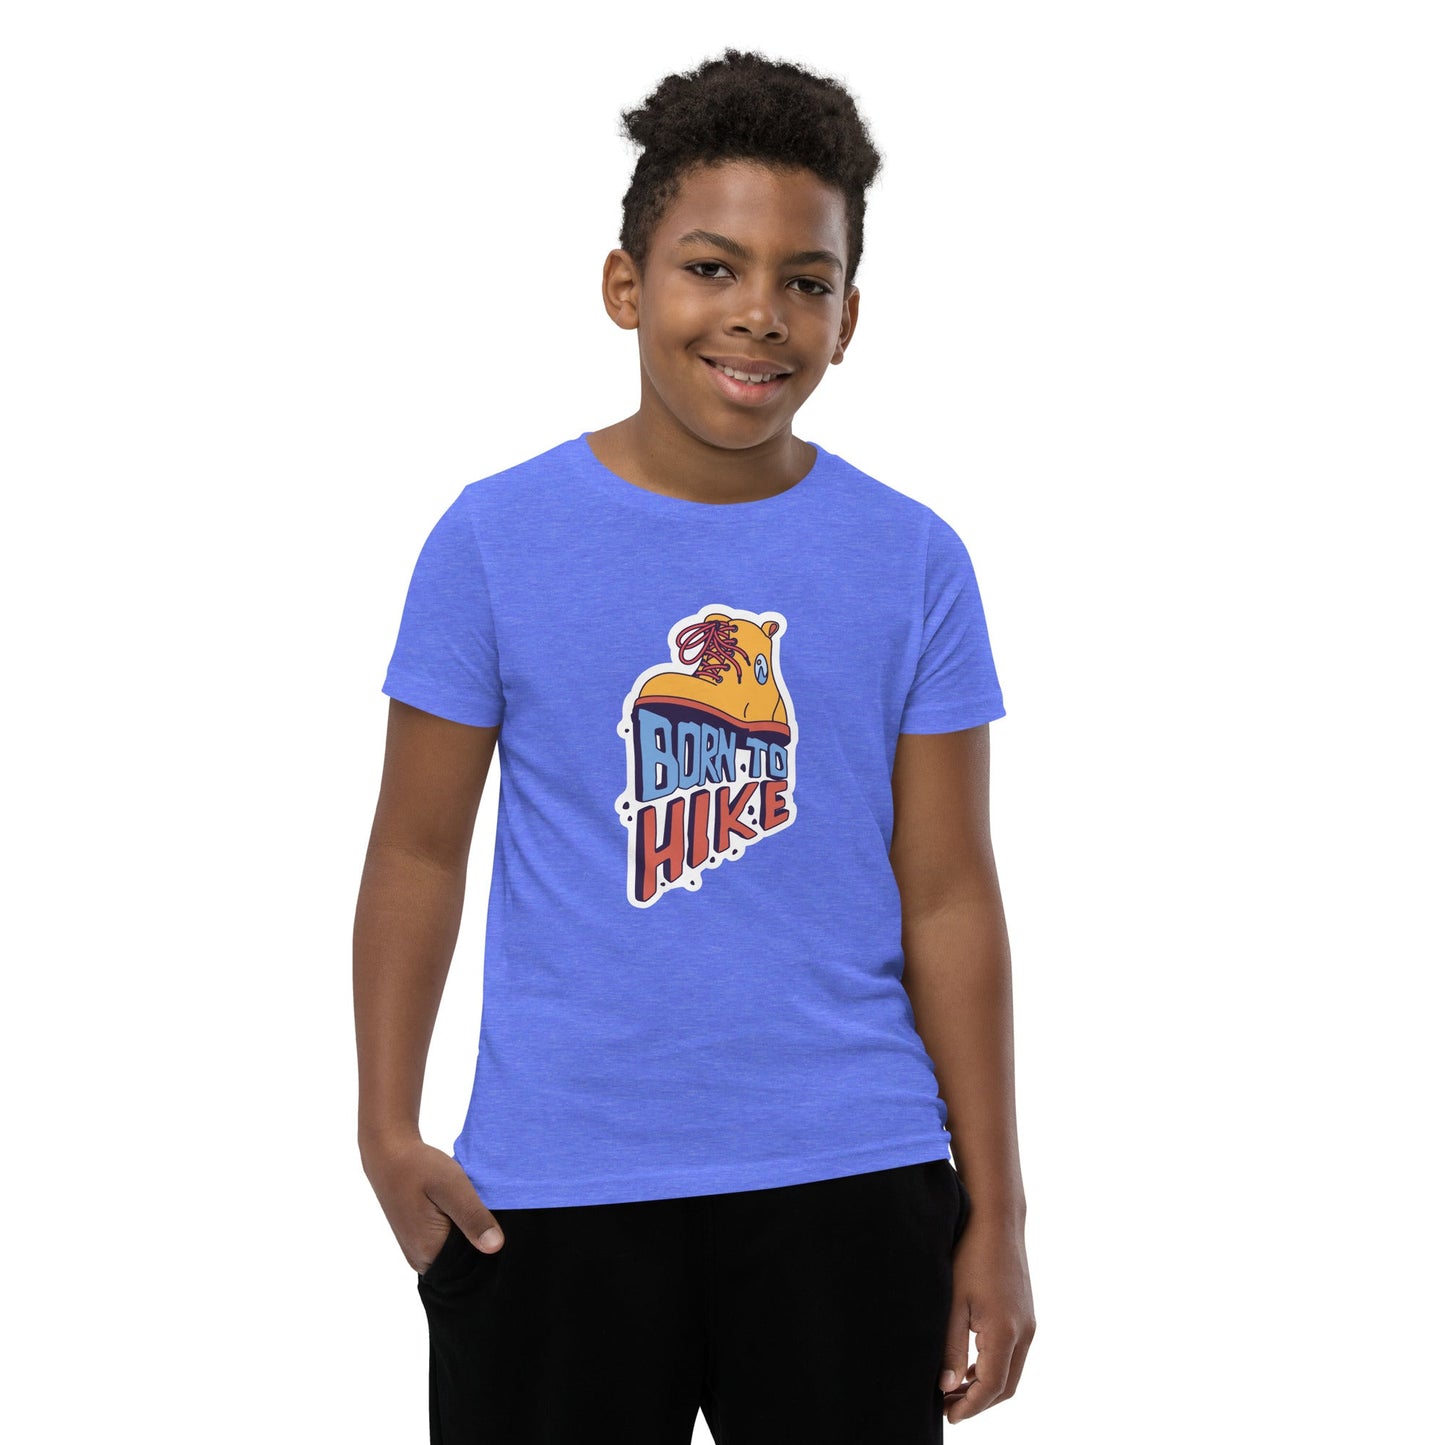 Born to Hike | Youth Short Sleeve T - Shirt